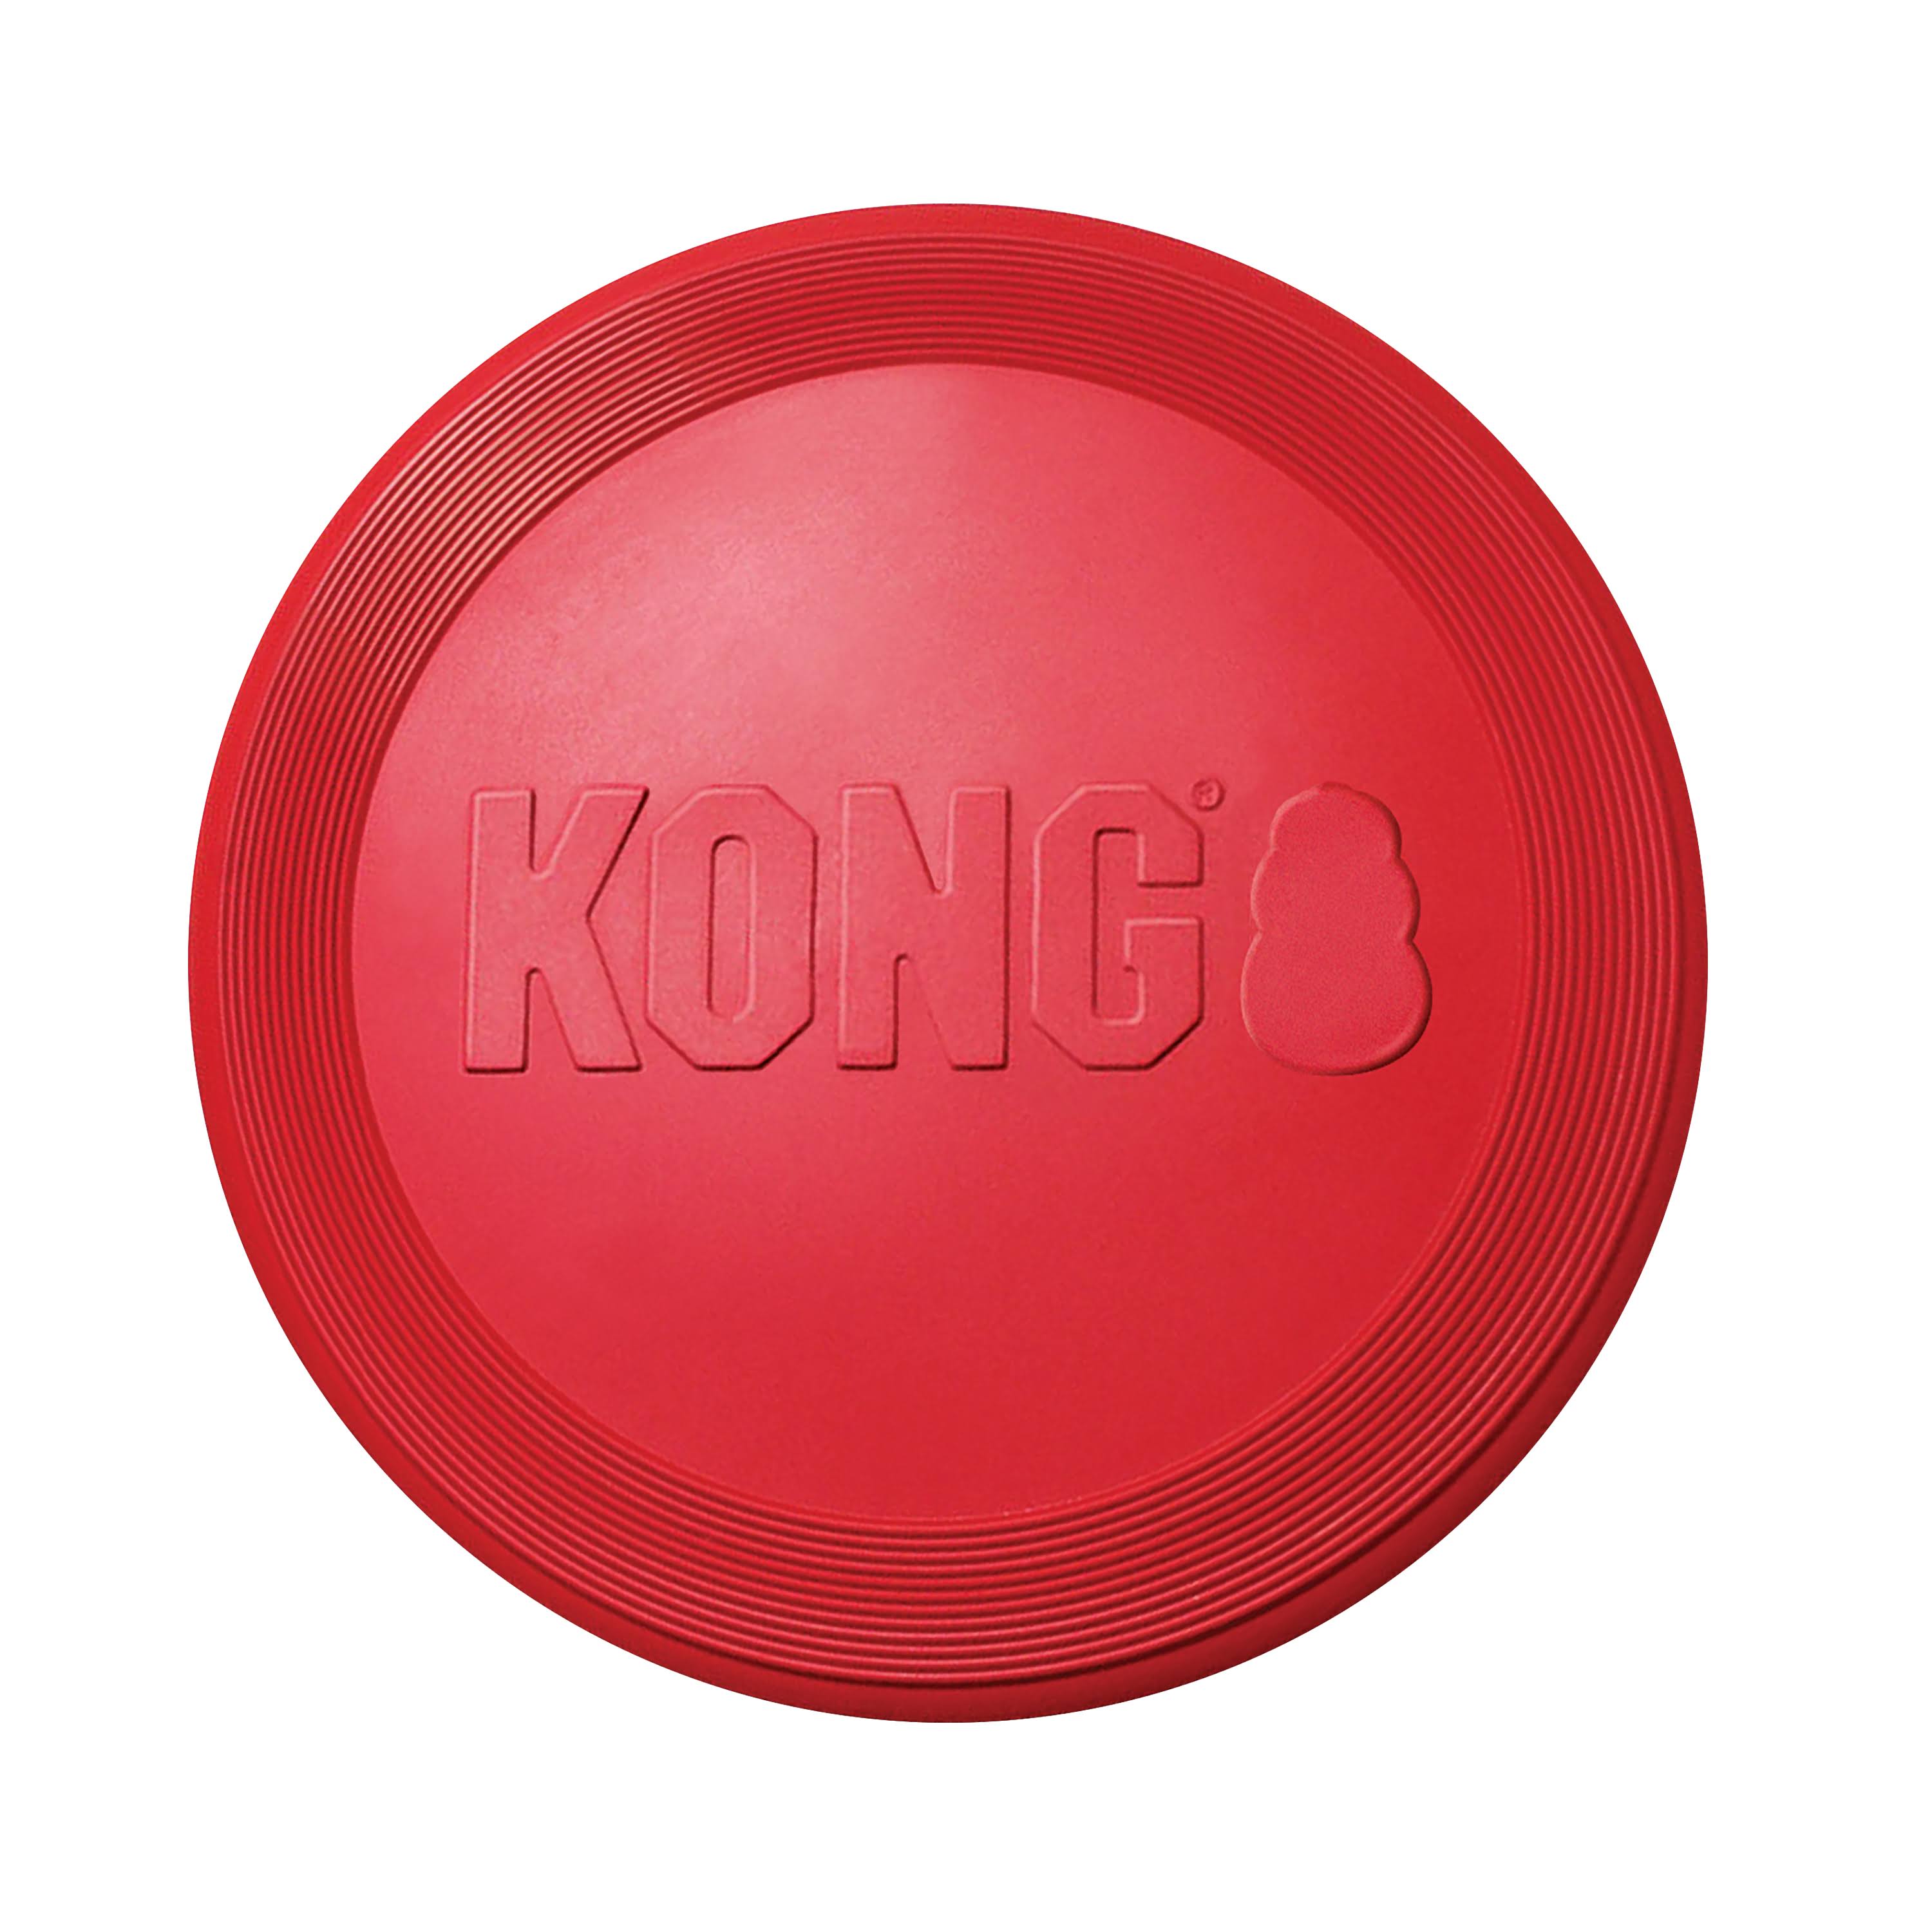 Kong Flyer Dog Toy - Red, Large